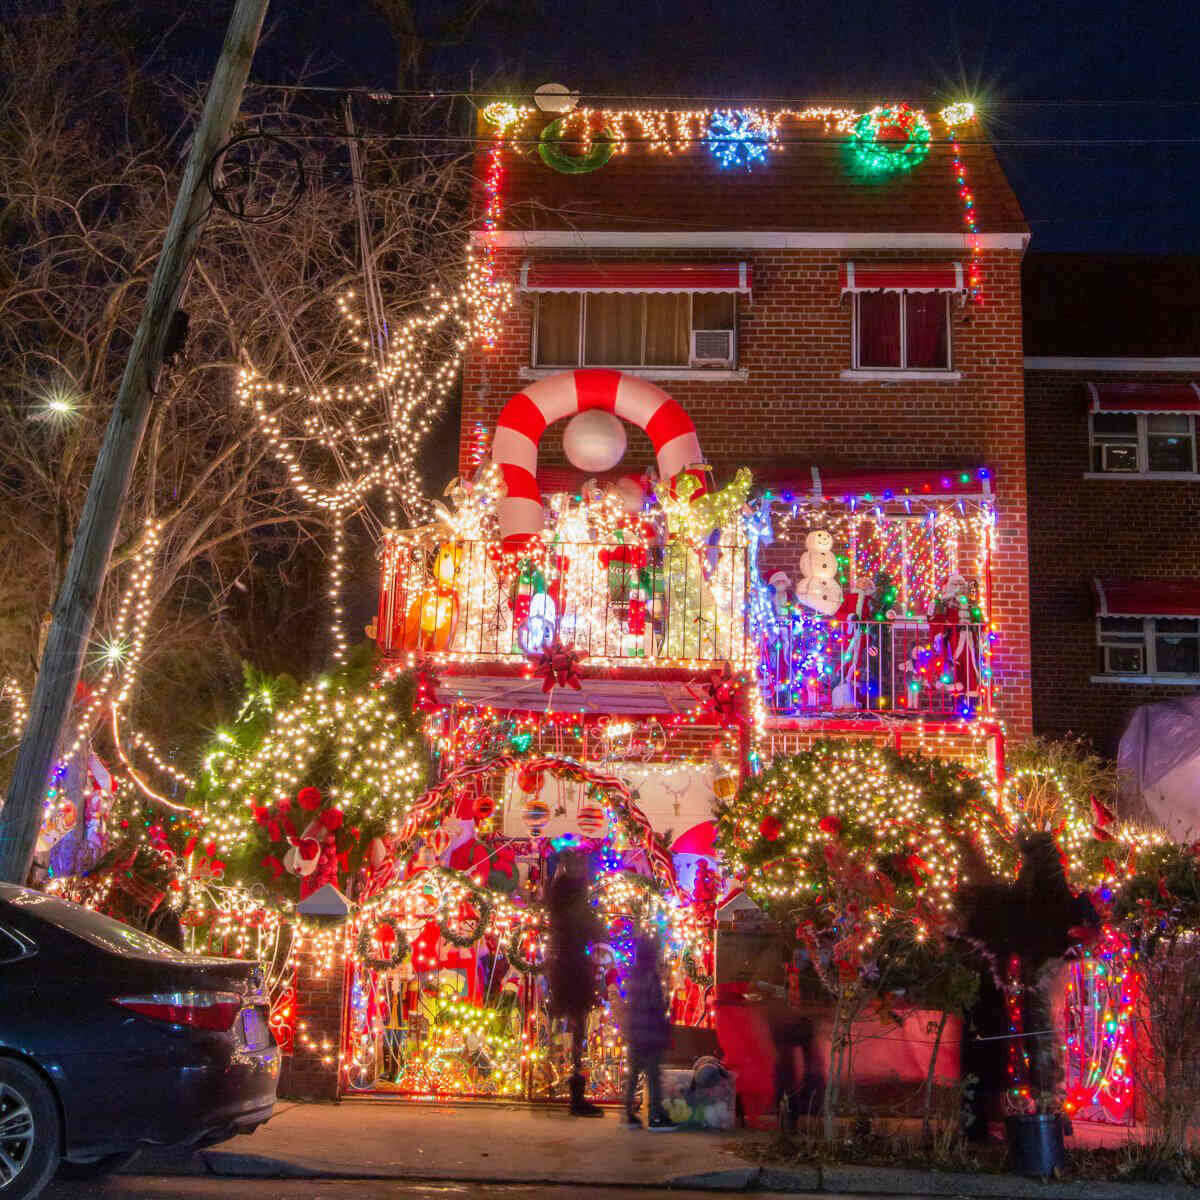 Throggs Neck residents continue holiday tradition by decorating Swinton Avenue home|Throggs Neck residents continue holiday tradition by decorating Swinton Avenue home